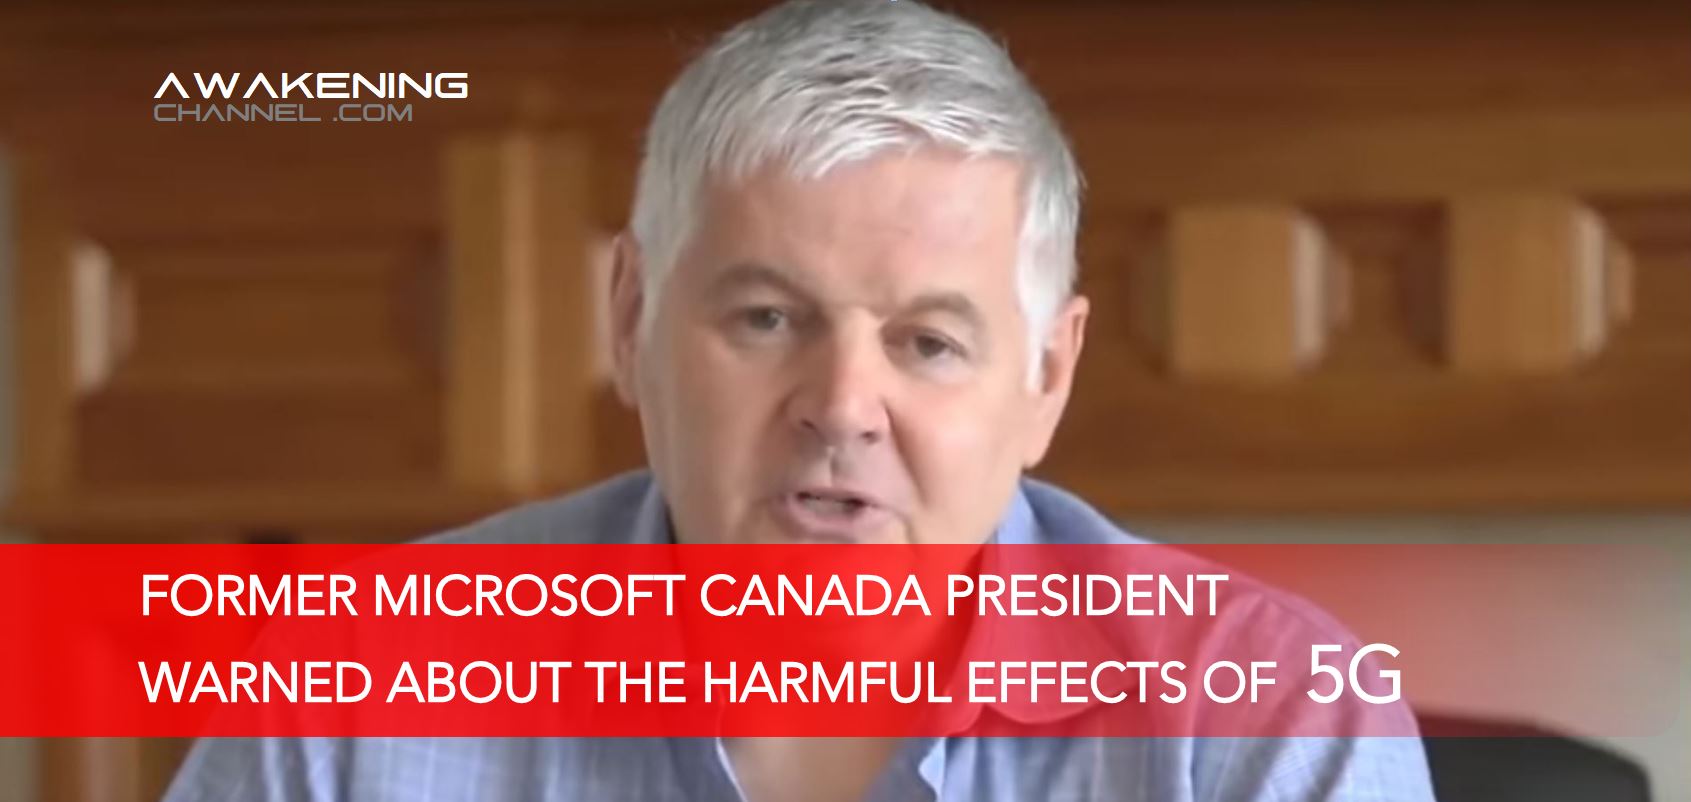 Former President of Microsoft Canada warned about the huge potential harmful effects of 5G